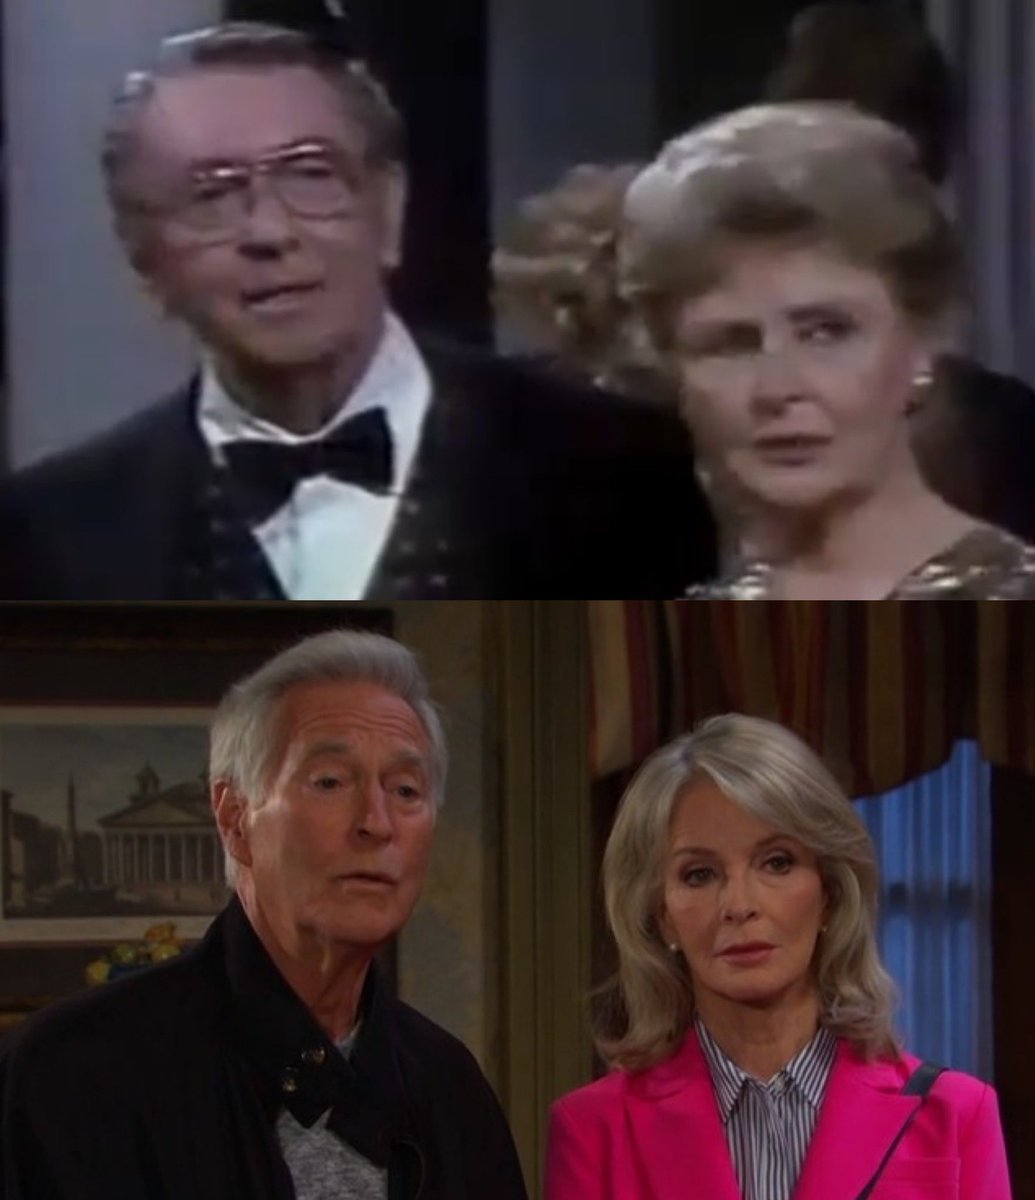 Continuing the couple glare tradition. 40 years apart almost to the day #Days